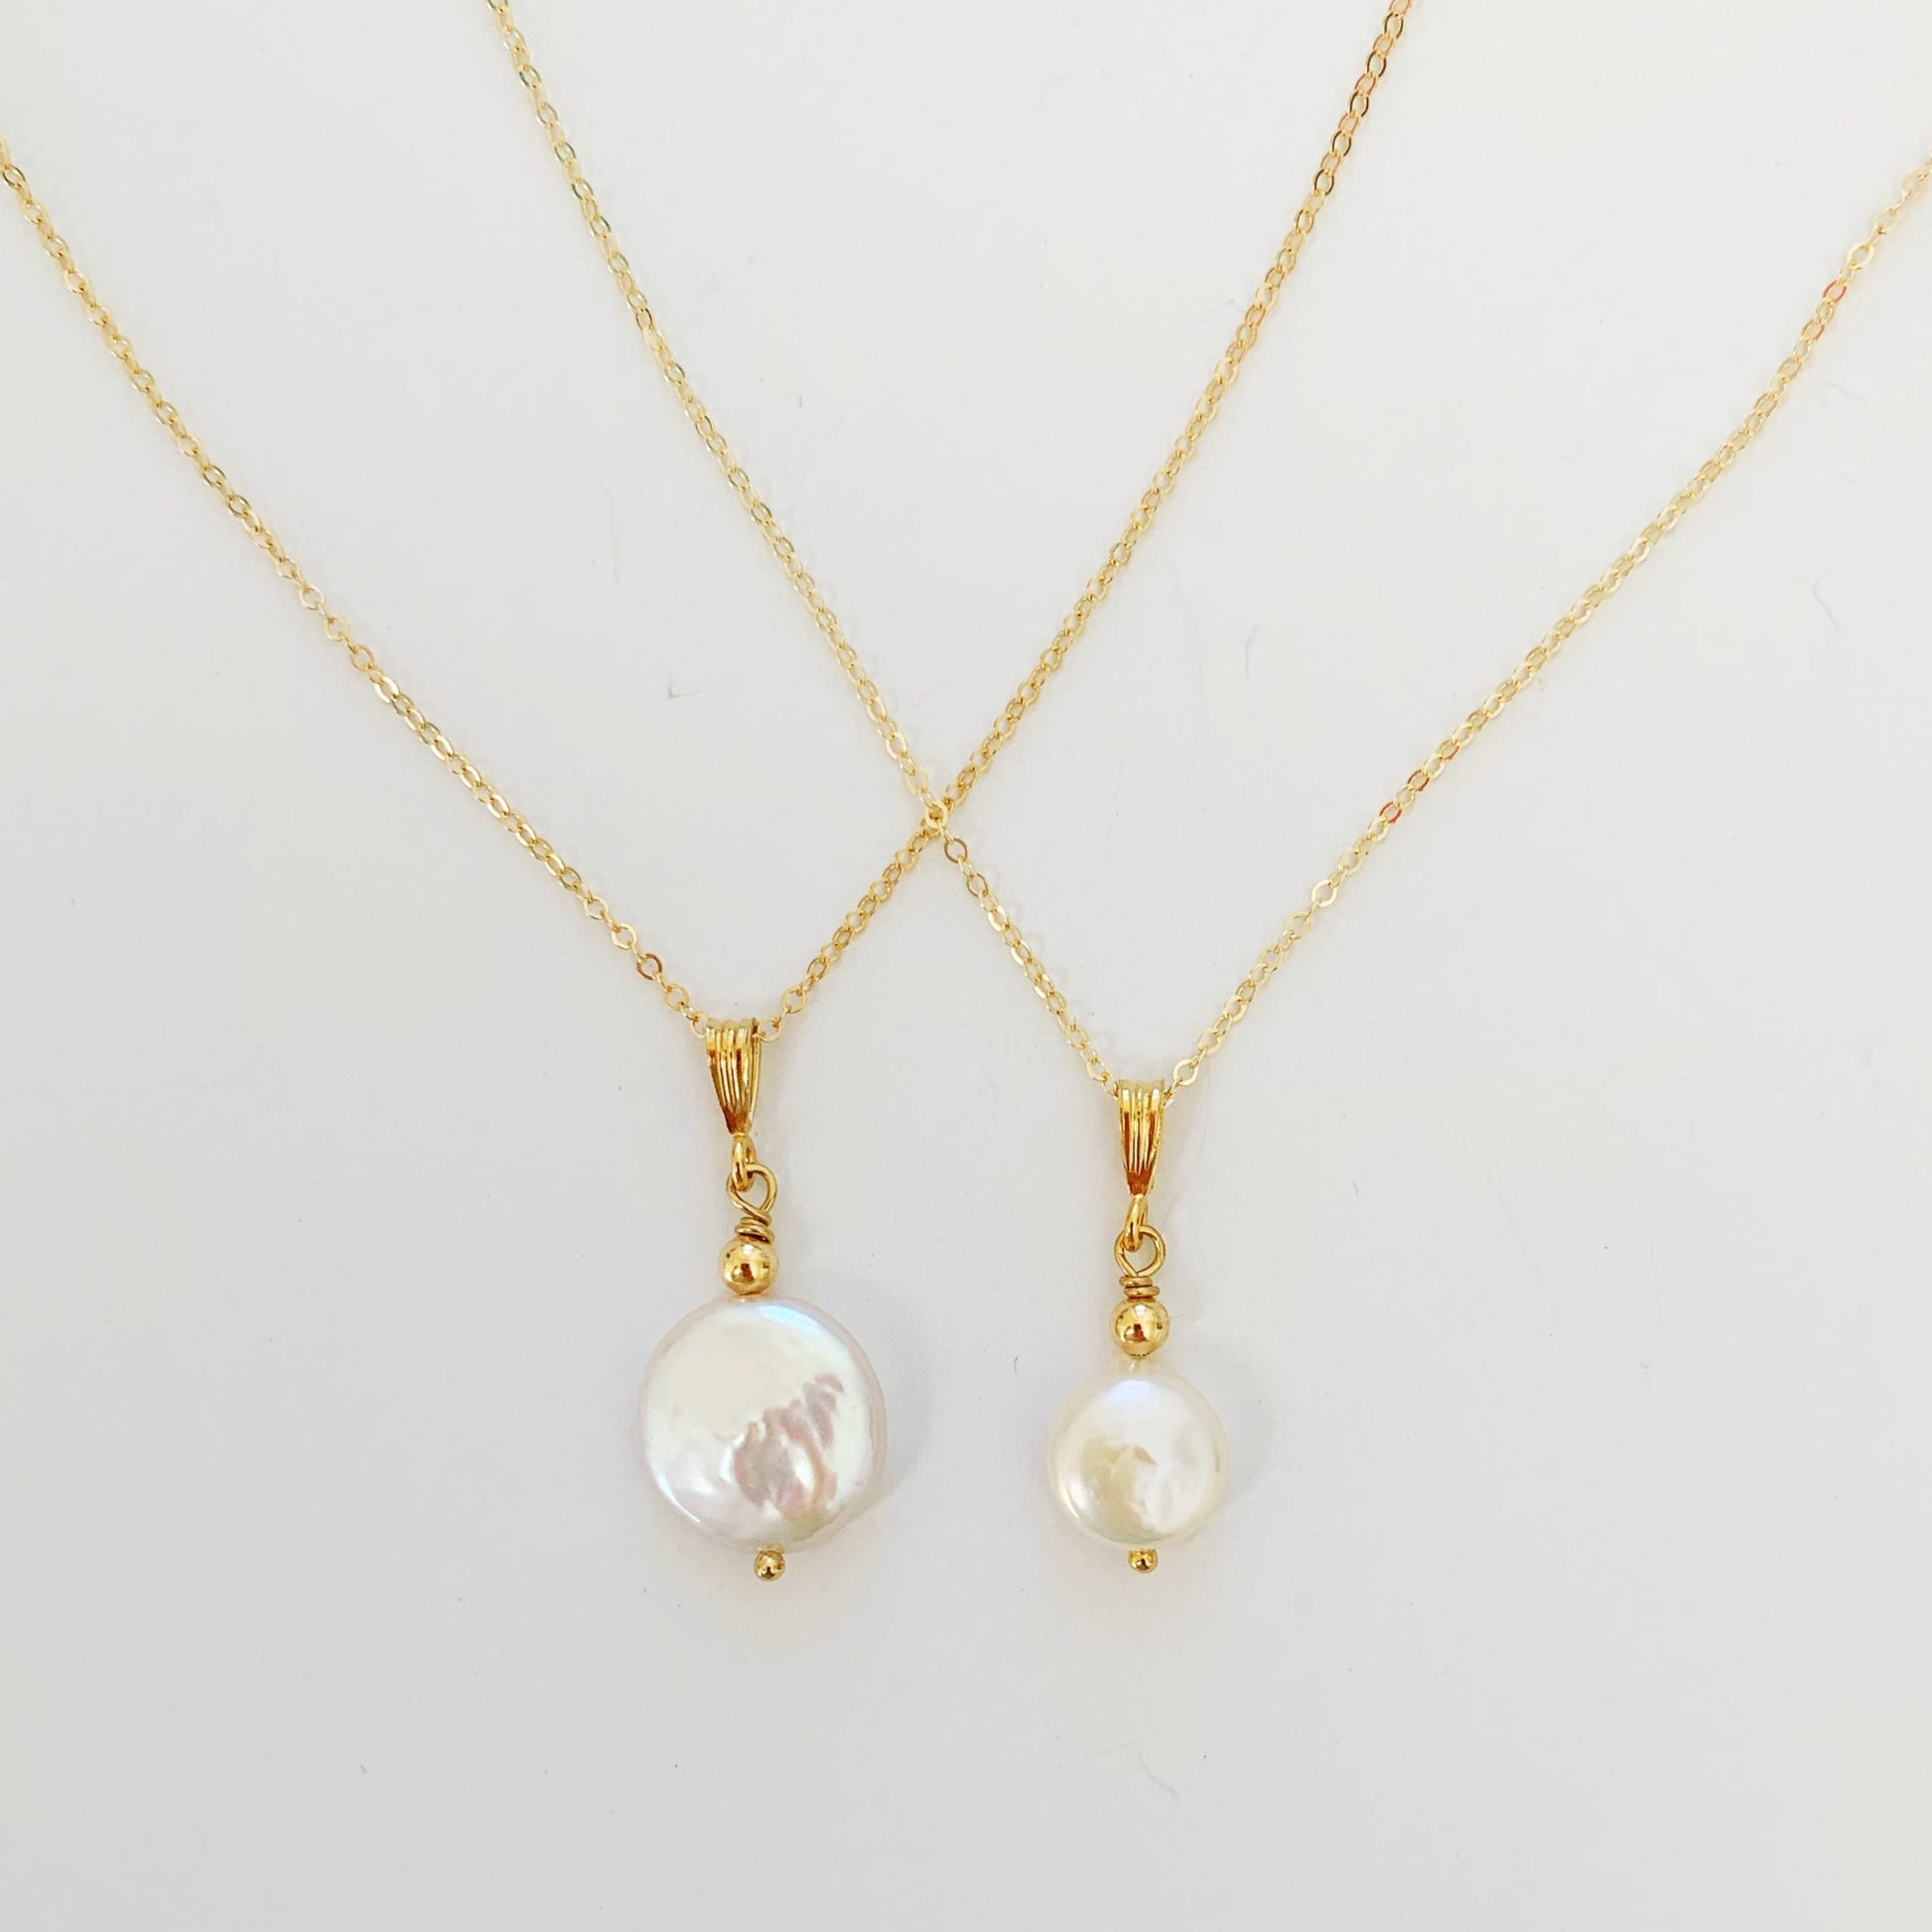 The newport gala necklace and newport original necklace pictured next to each other on a white surface for size comparison